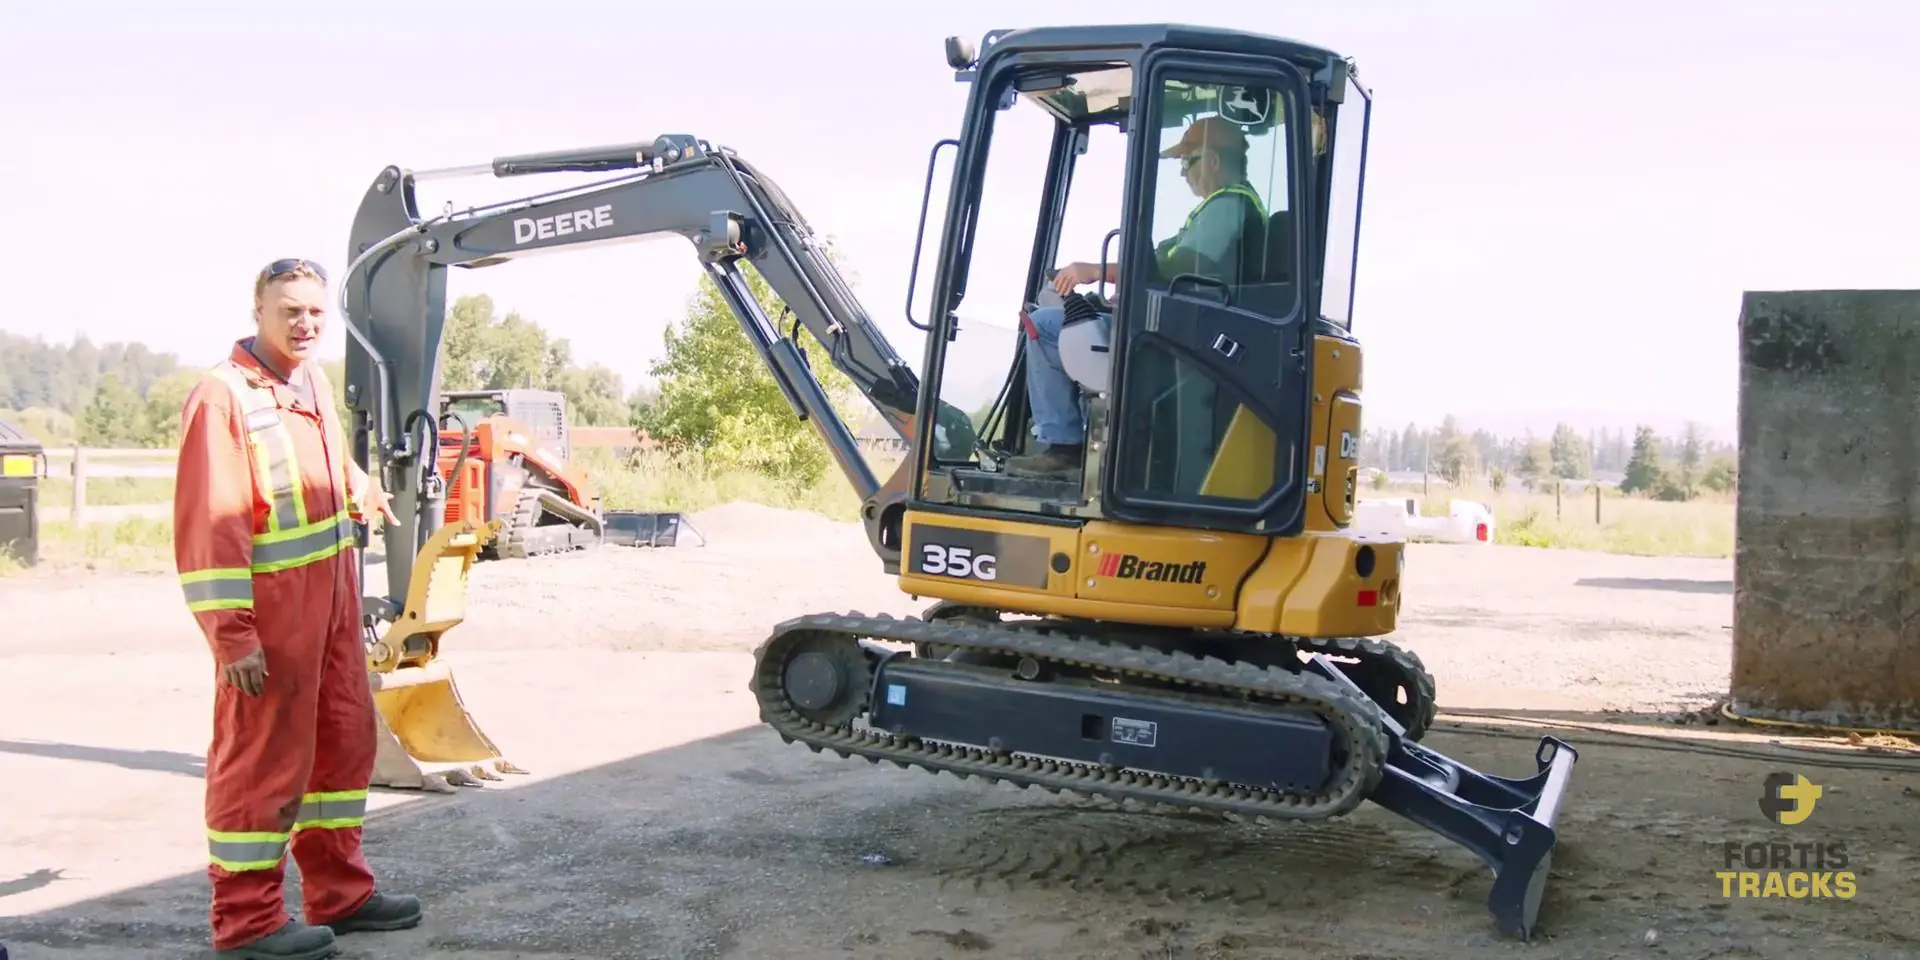 Heavy duty equipment operator using the blade and bucket to lift a mini excavator off it's tracks